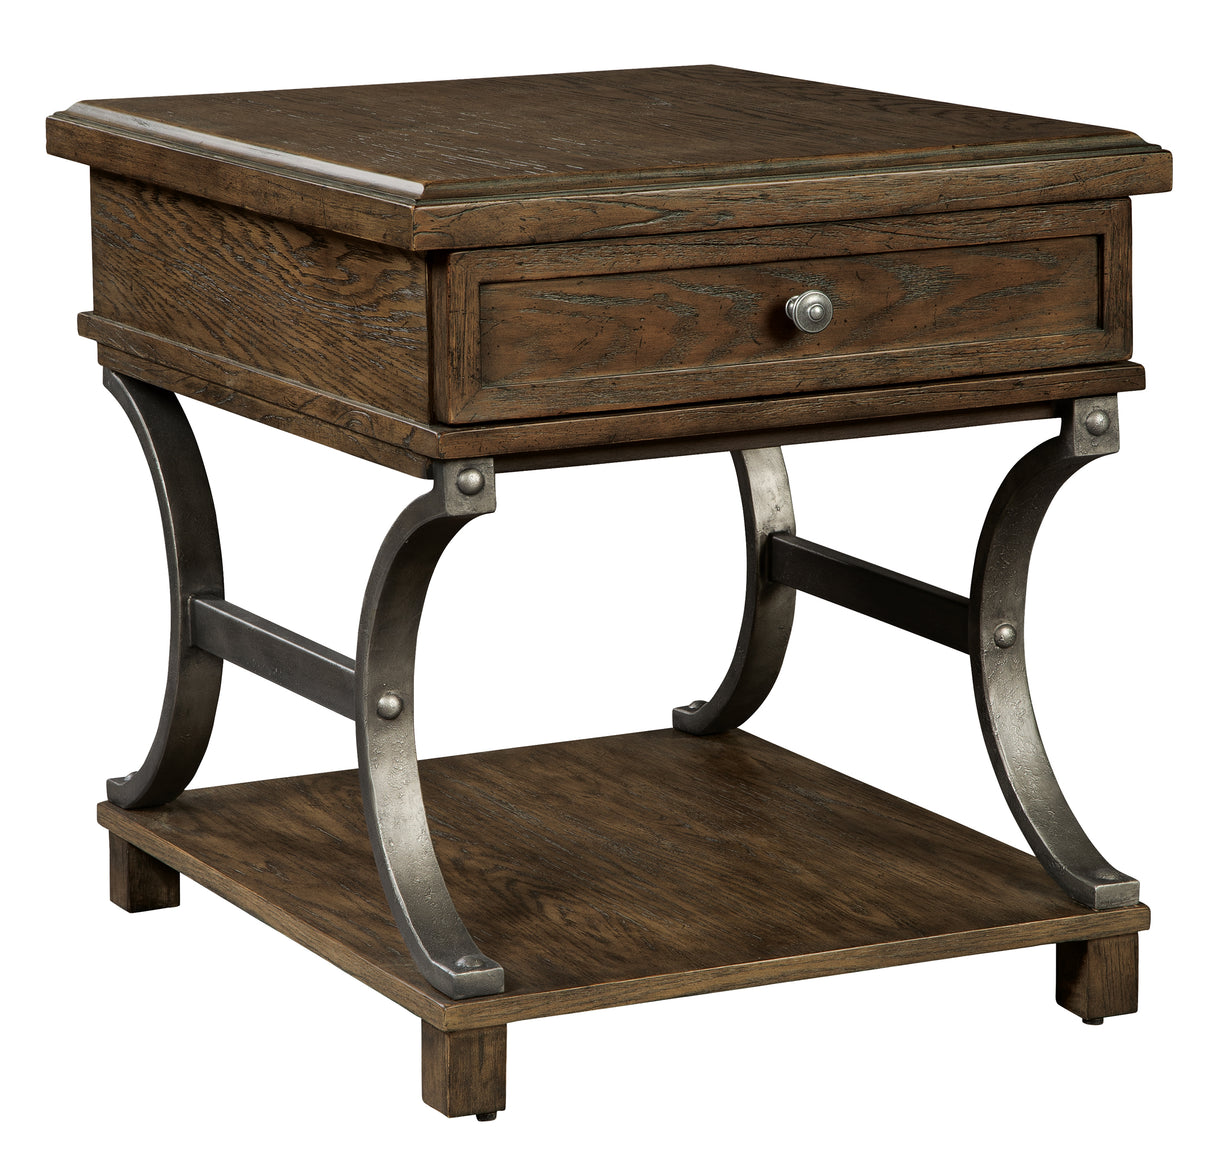 Hekman 24806 Wexford 24in. x 27in. x 26.25in. End Table